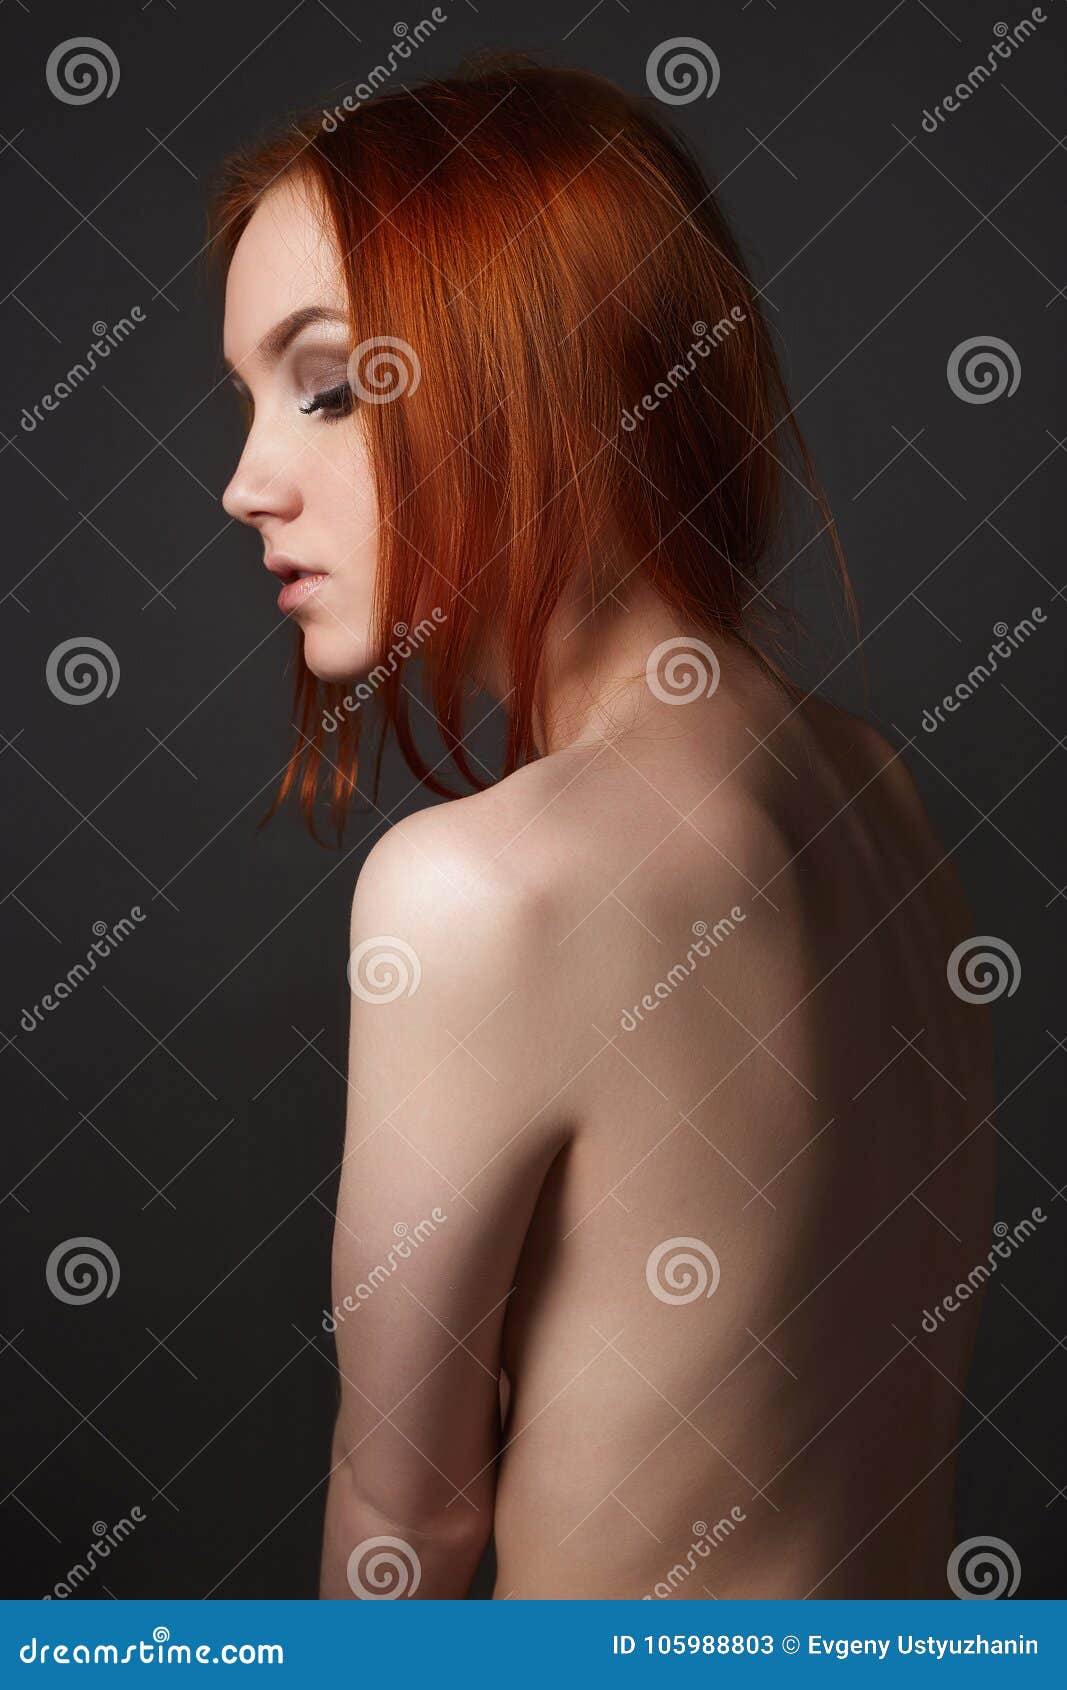 Natural red heads nude - Real Naked Girls